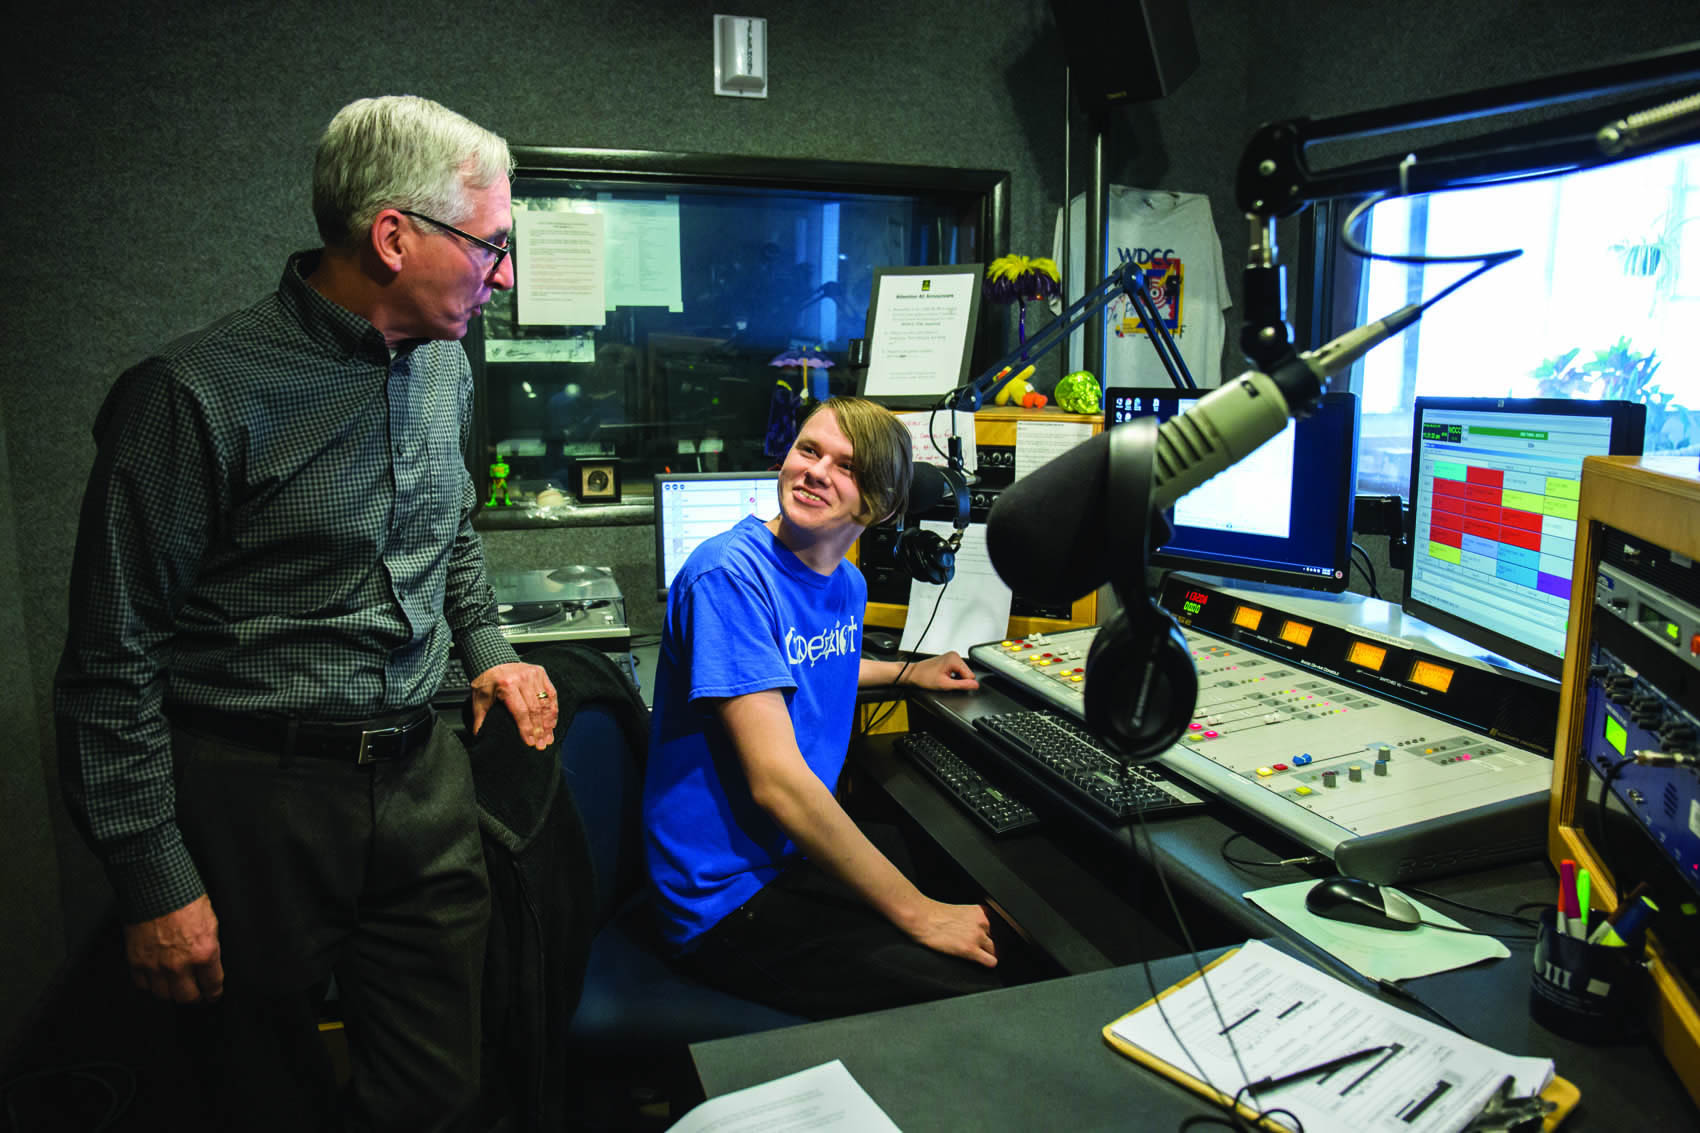 Read the full story, CCCC's broadcast production program is 'on air'